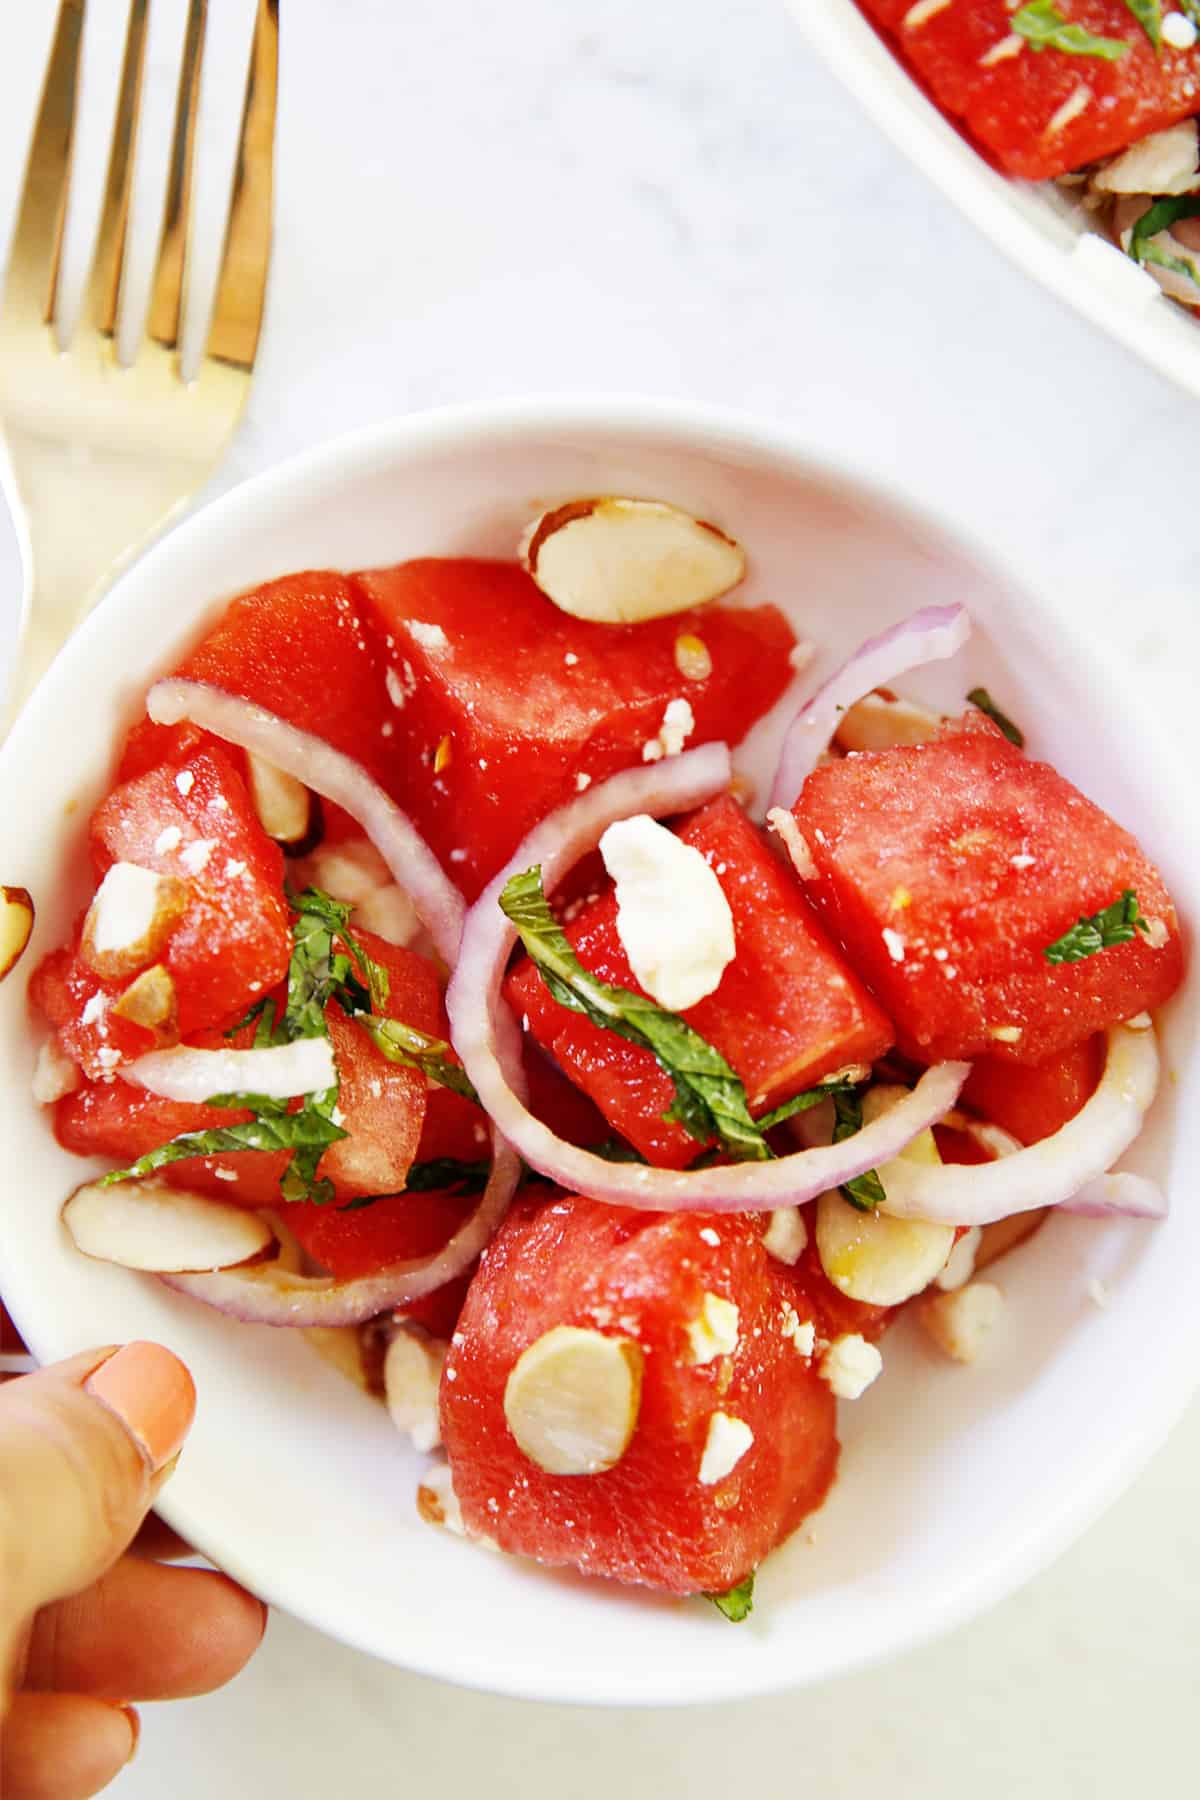 A serving of watermelon salad.